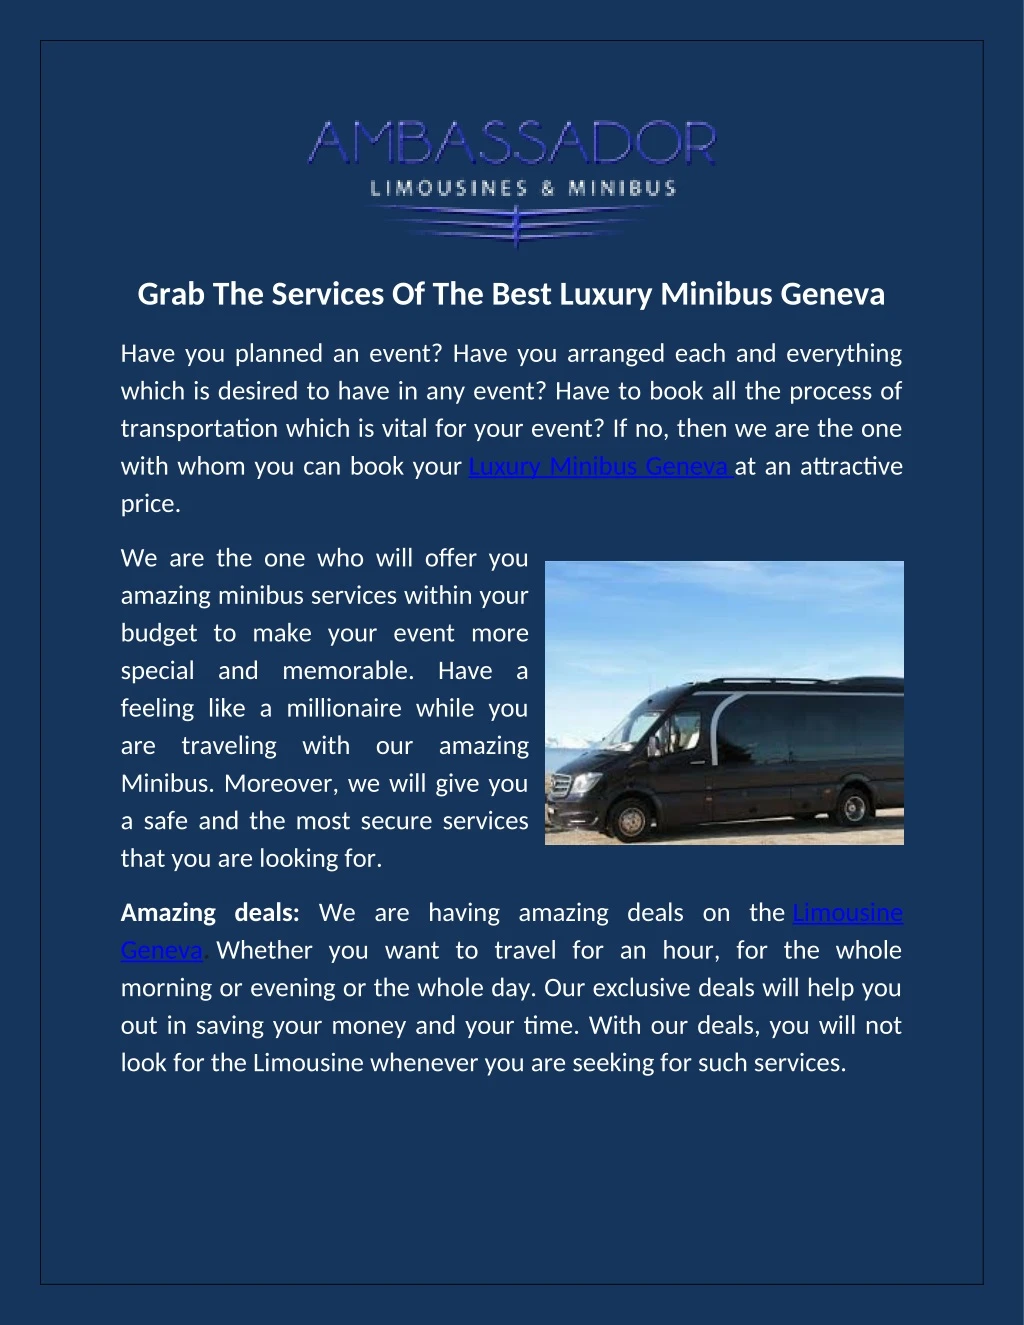 grab the services of the best luxury minibus